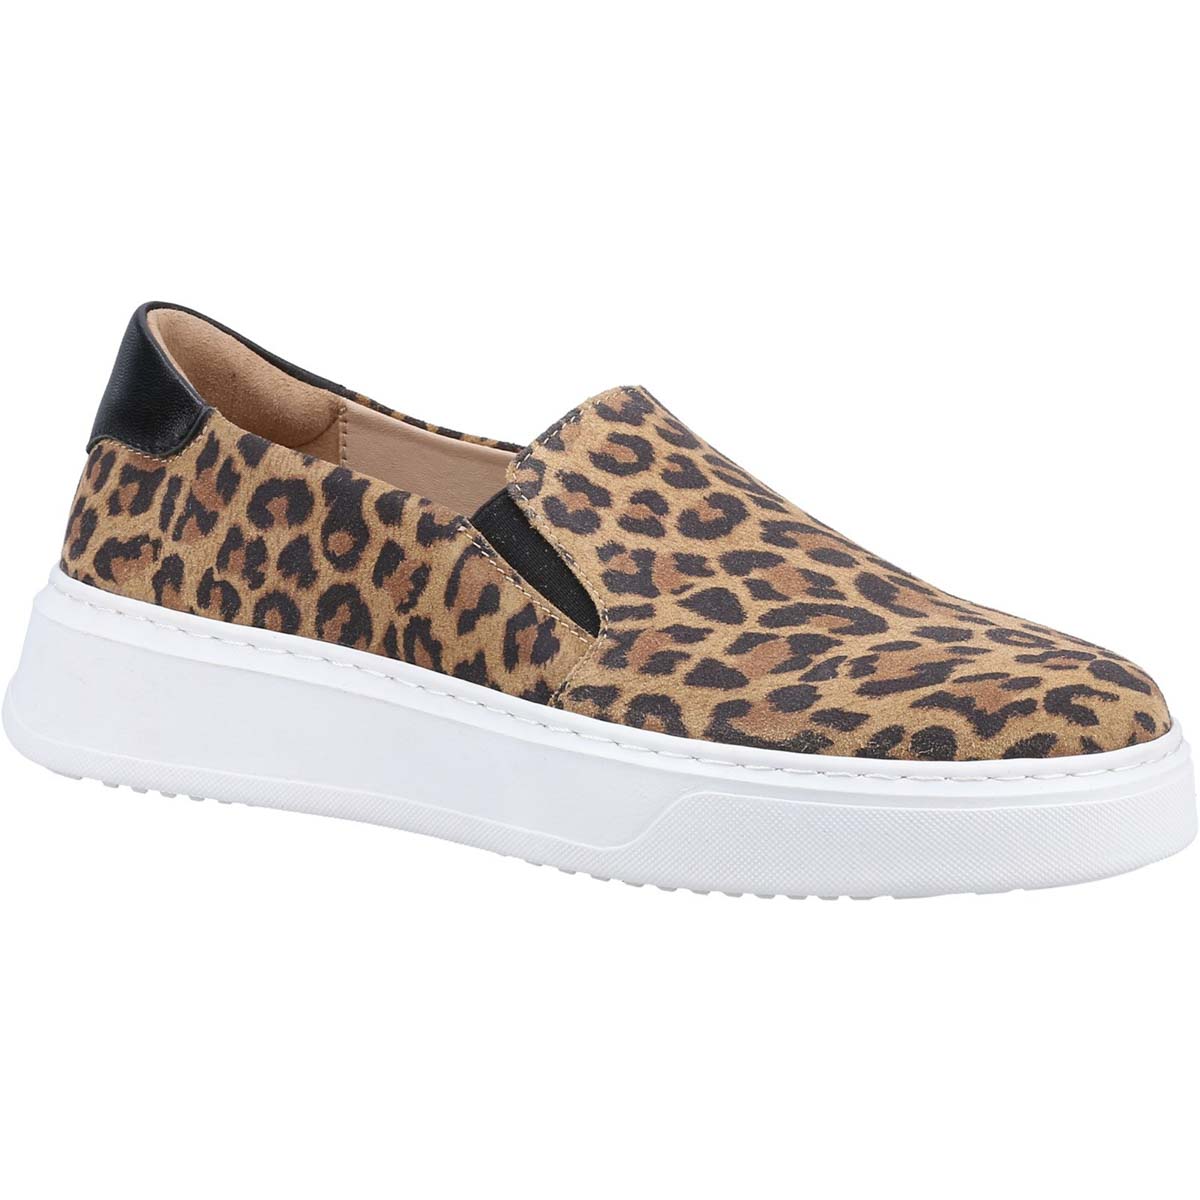 Hush Puppies Corinne Leopard print Womens Comfort Slip On Shoes 36597-68242 in a Plain Leather in Size 9